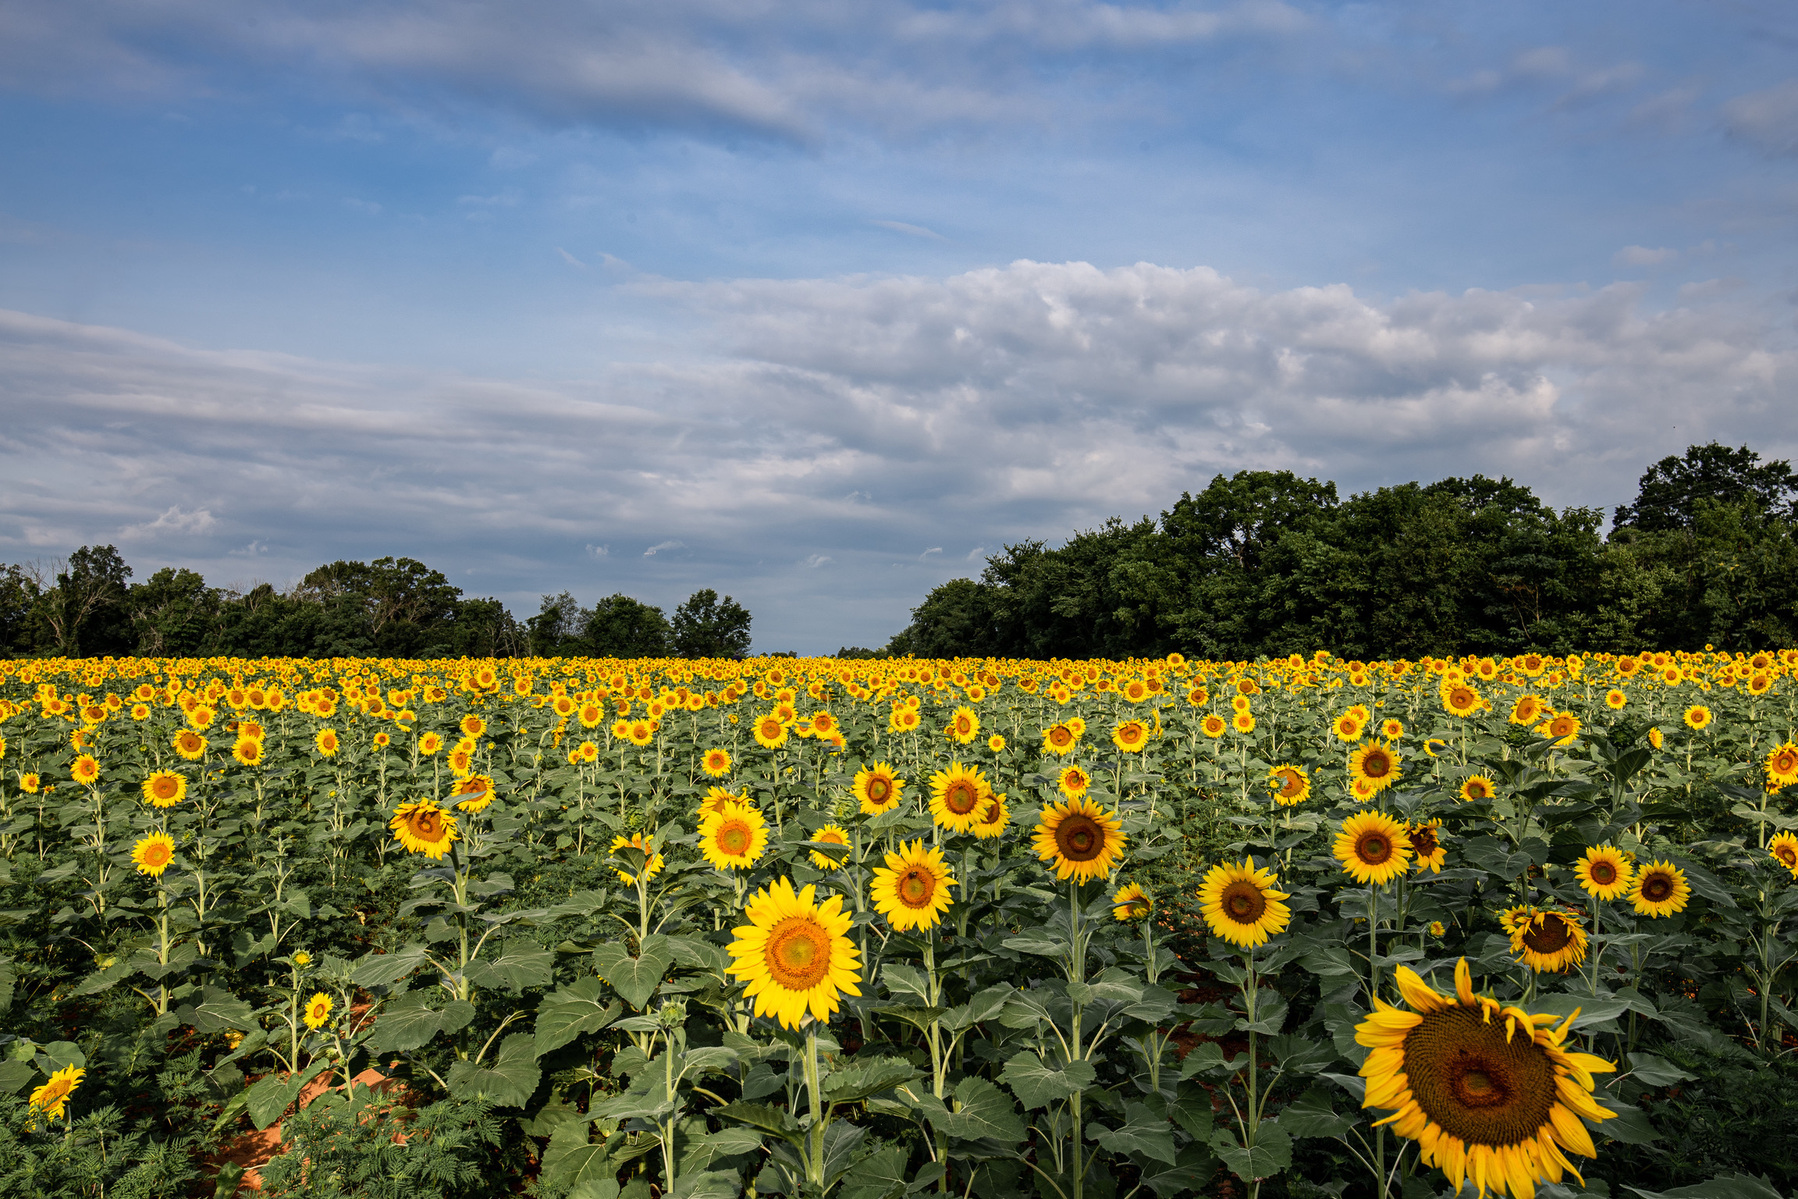 Sunflowers at McKee-Besher Wildlife Area, Maryland.
Photography summer flowers in DC 